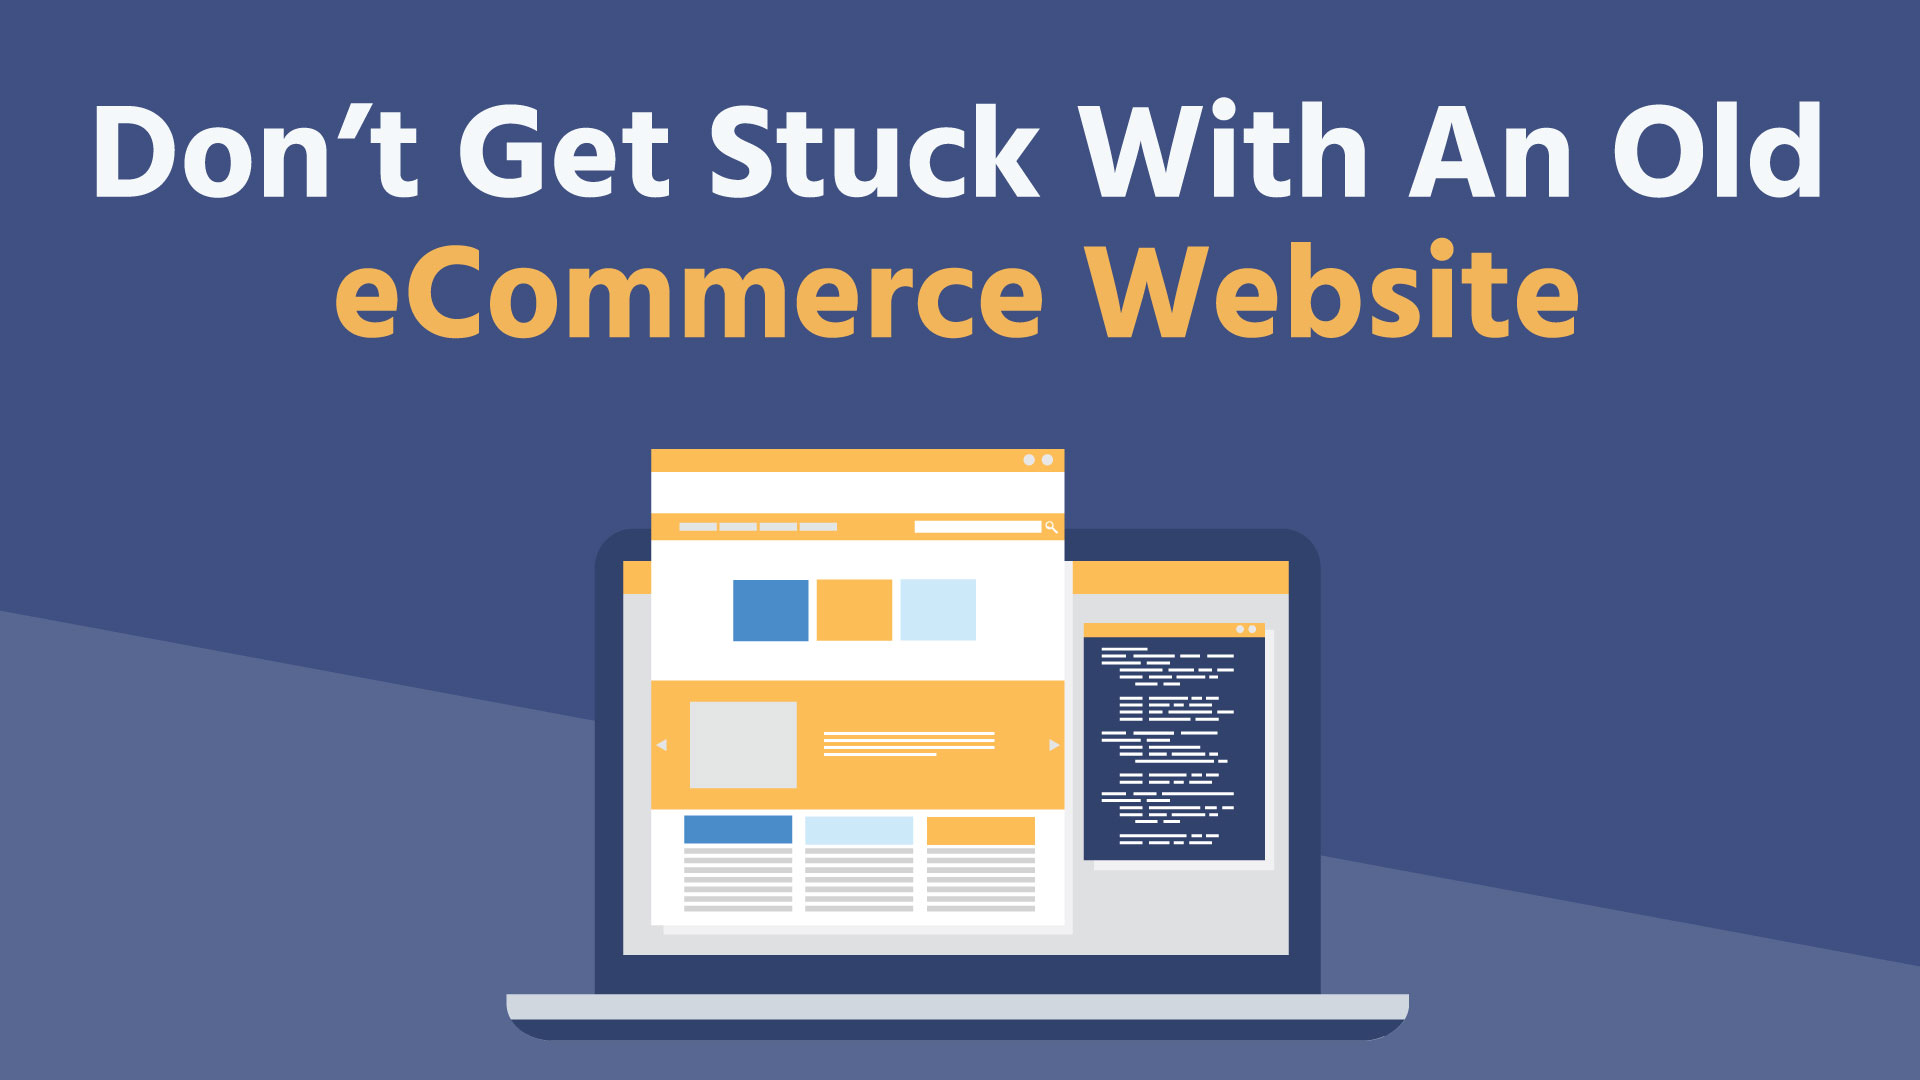 Don't get stuck with an old eCommerce website.